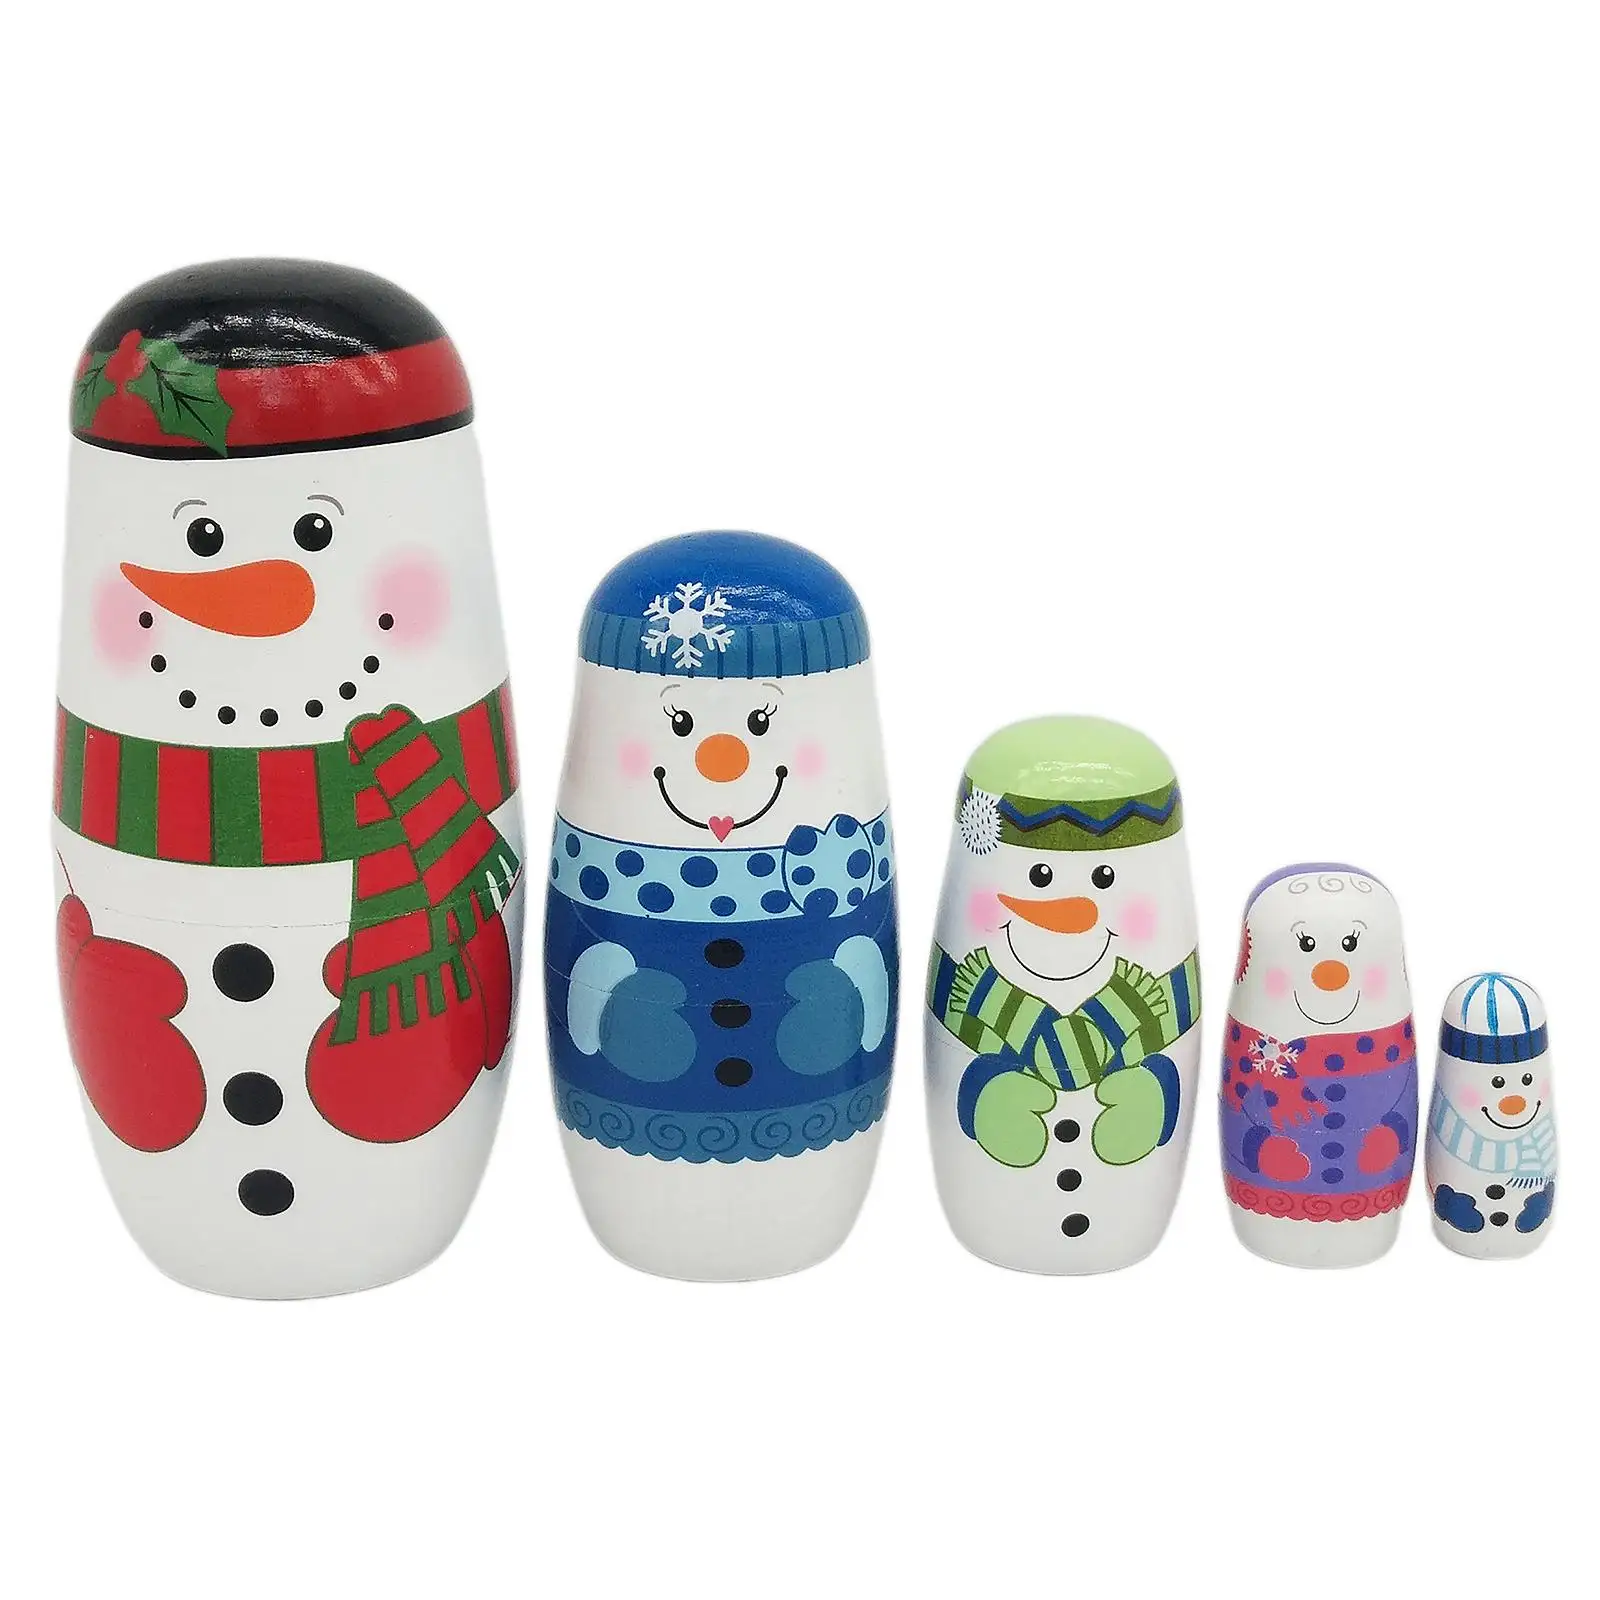 Wooden Russian Nesting Dolls 5 Layers Novelty Snowman Stacking Nested Handmade Toys for Children Christmas  Gift